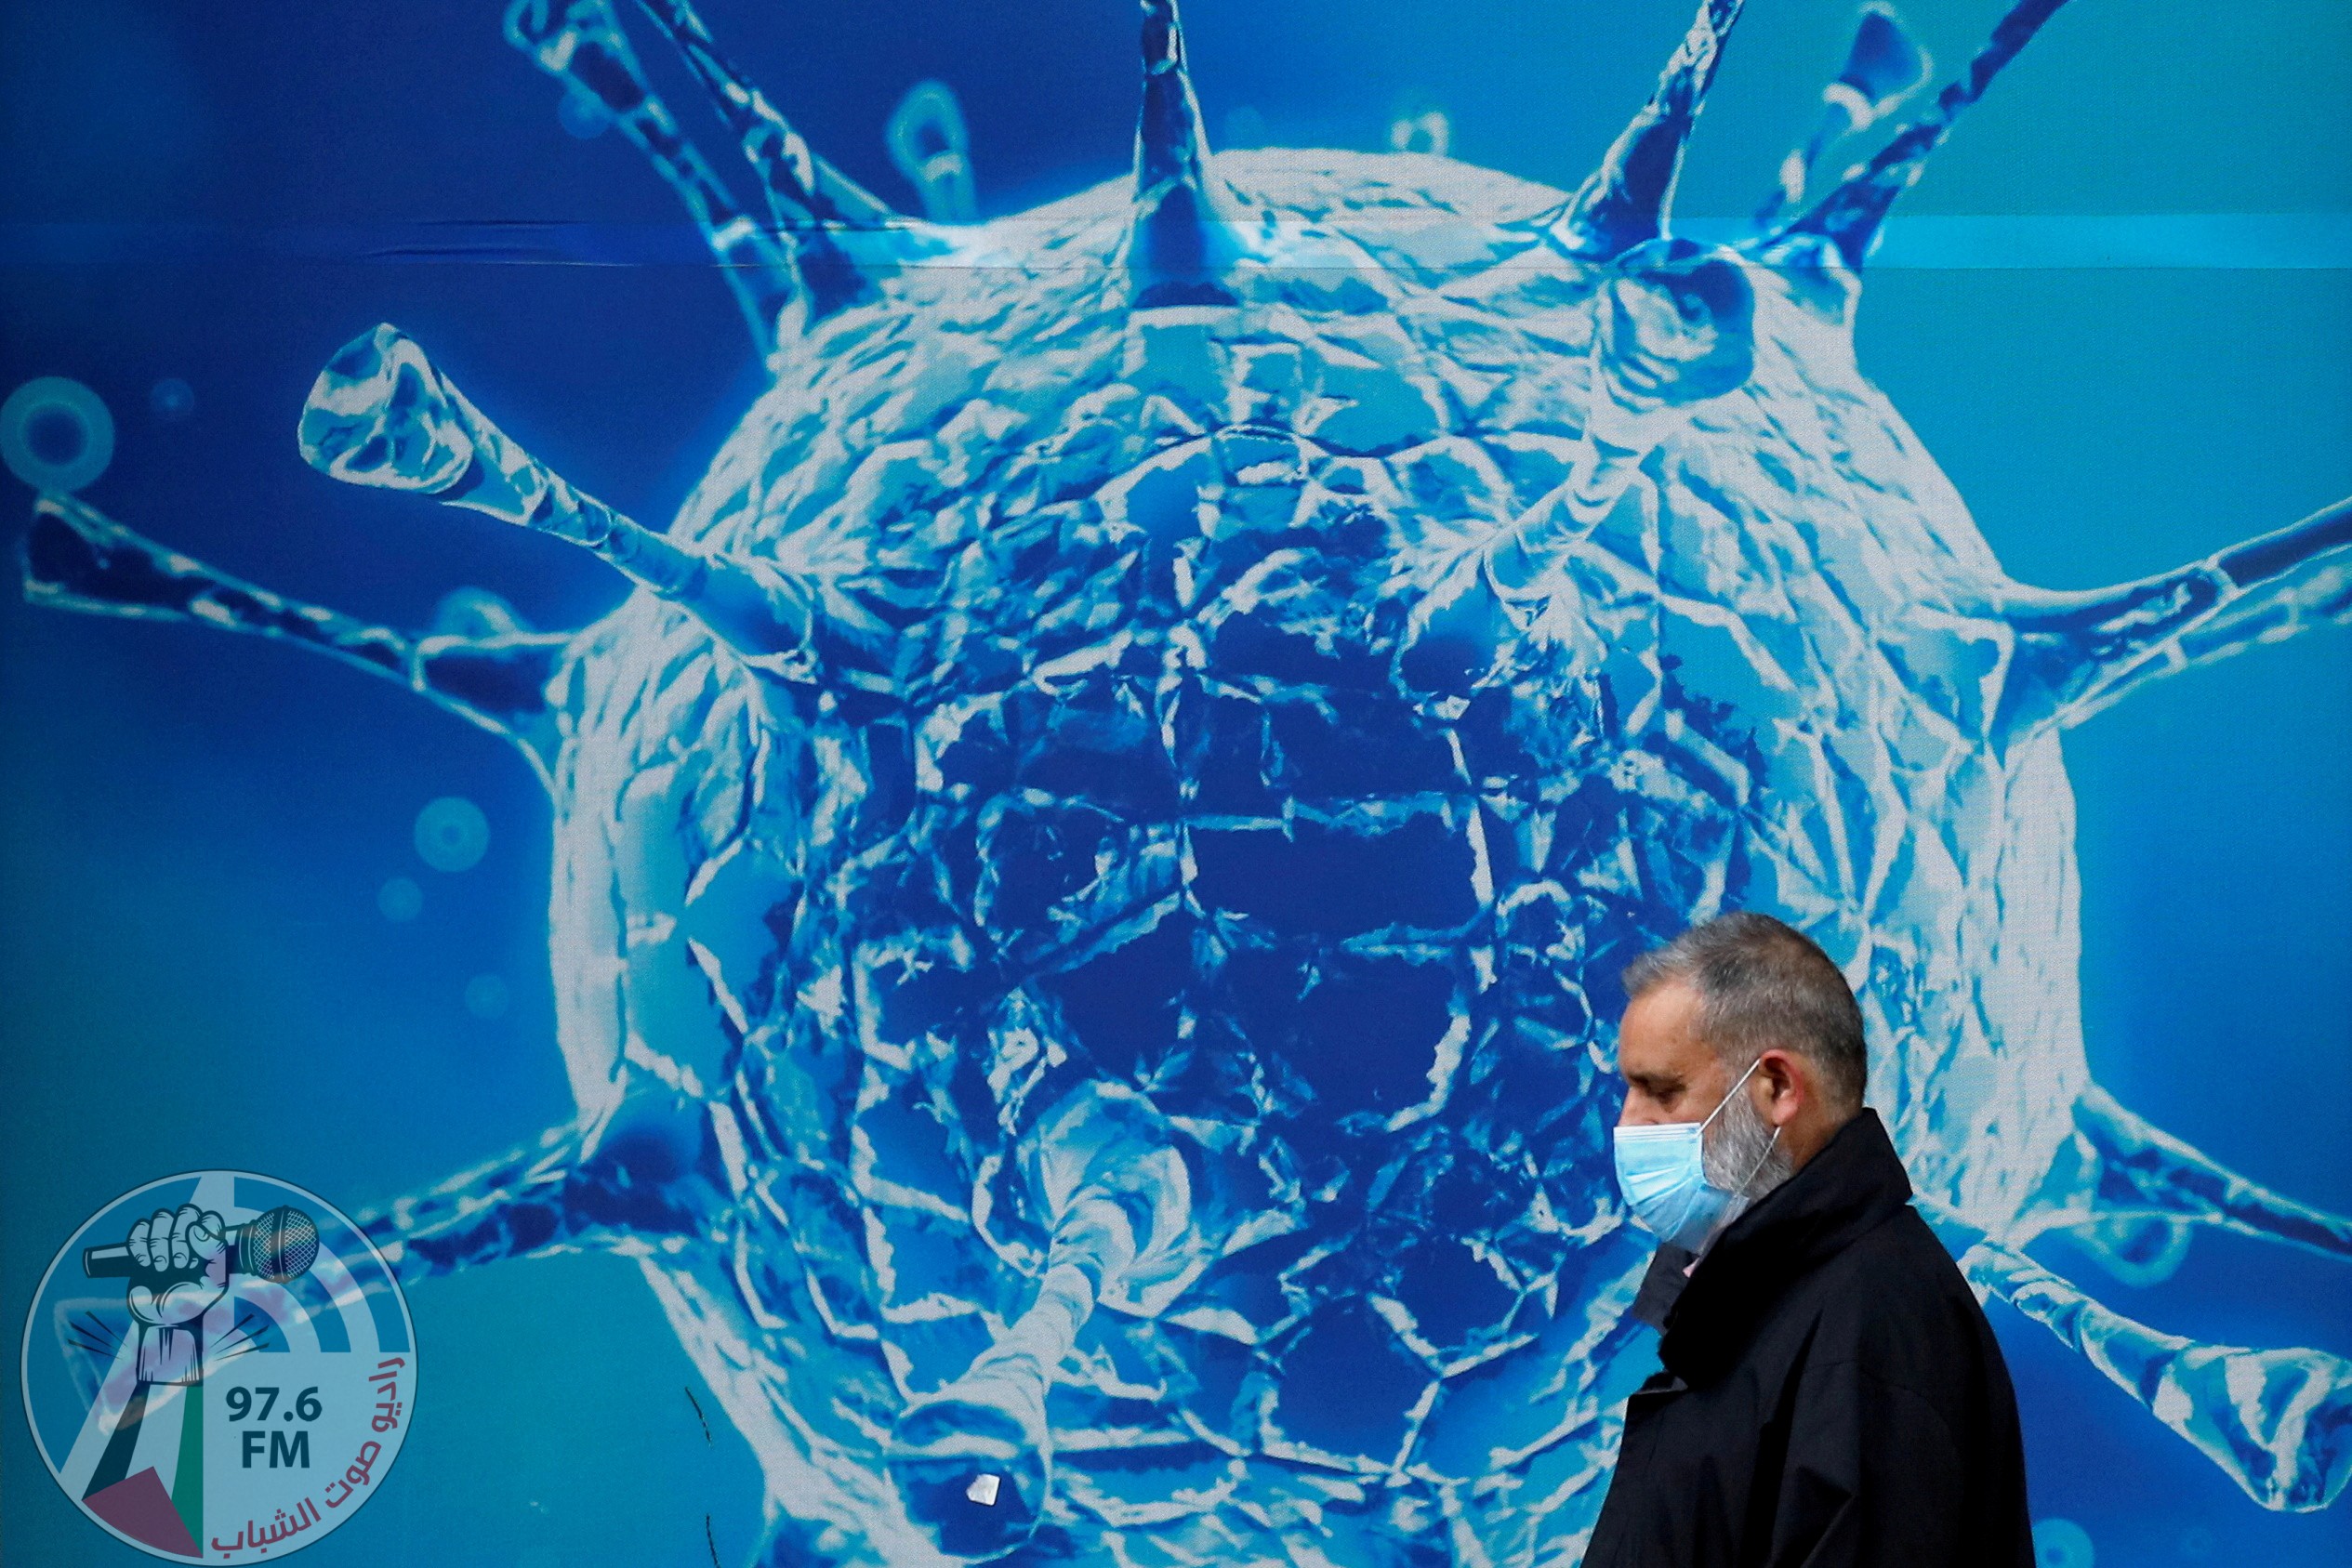 FILE PHOTO: A man wearing a protective face mask walks past an illustration of a virus outside a regional science centre amid the coronavirus disease (COVID-19) outbreak, in Oldham, Britain August 3, 2020. REUTERS/Phil Noble/File Photo